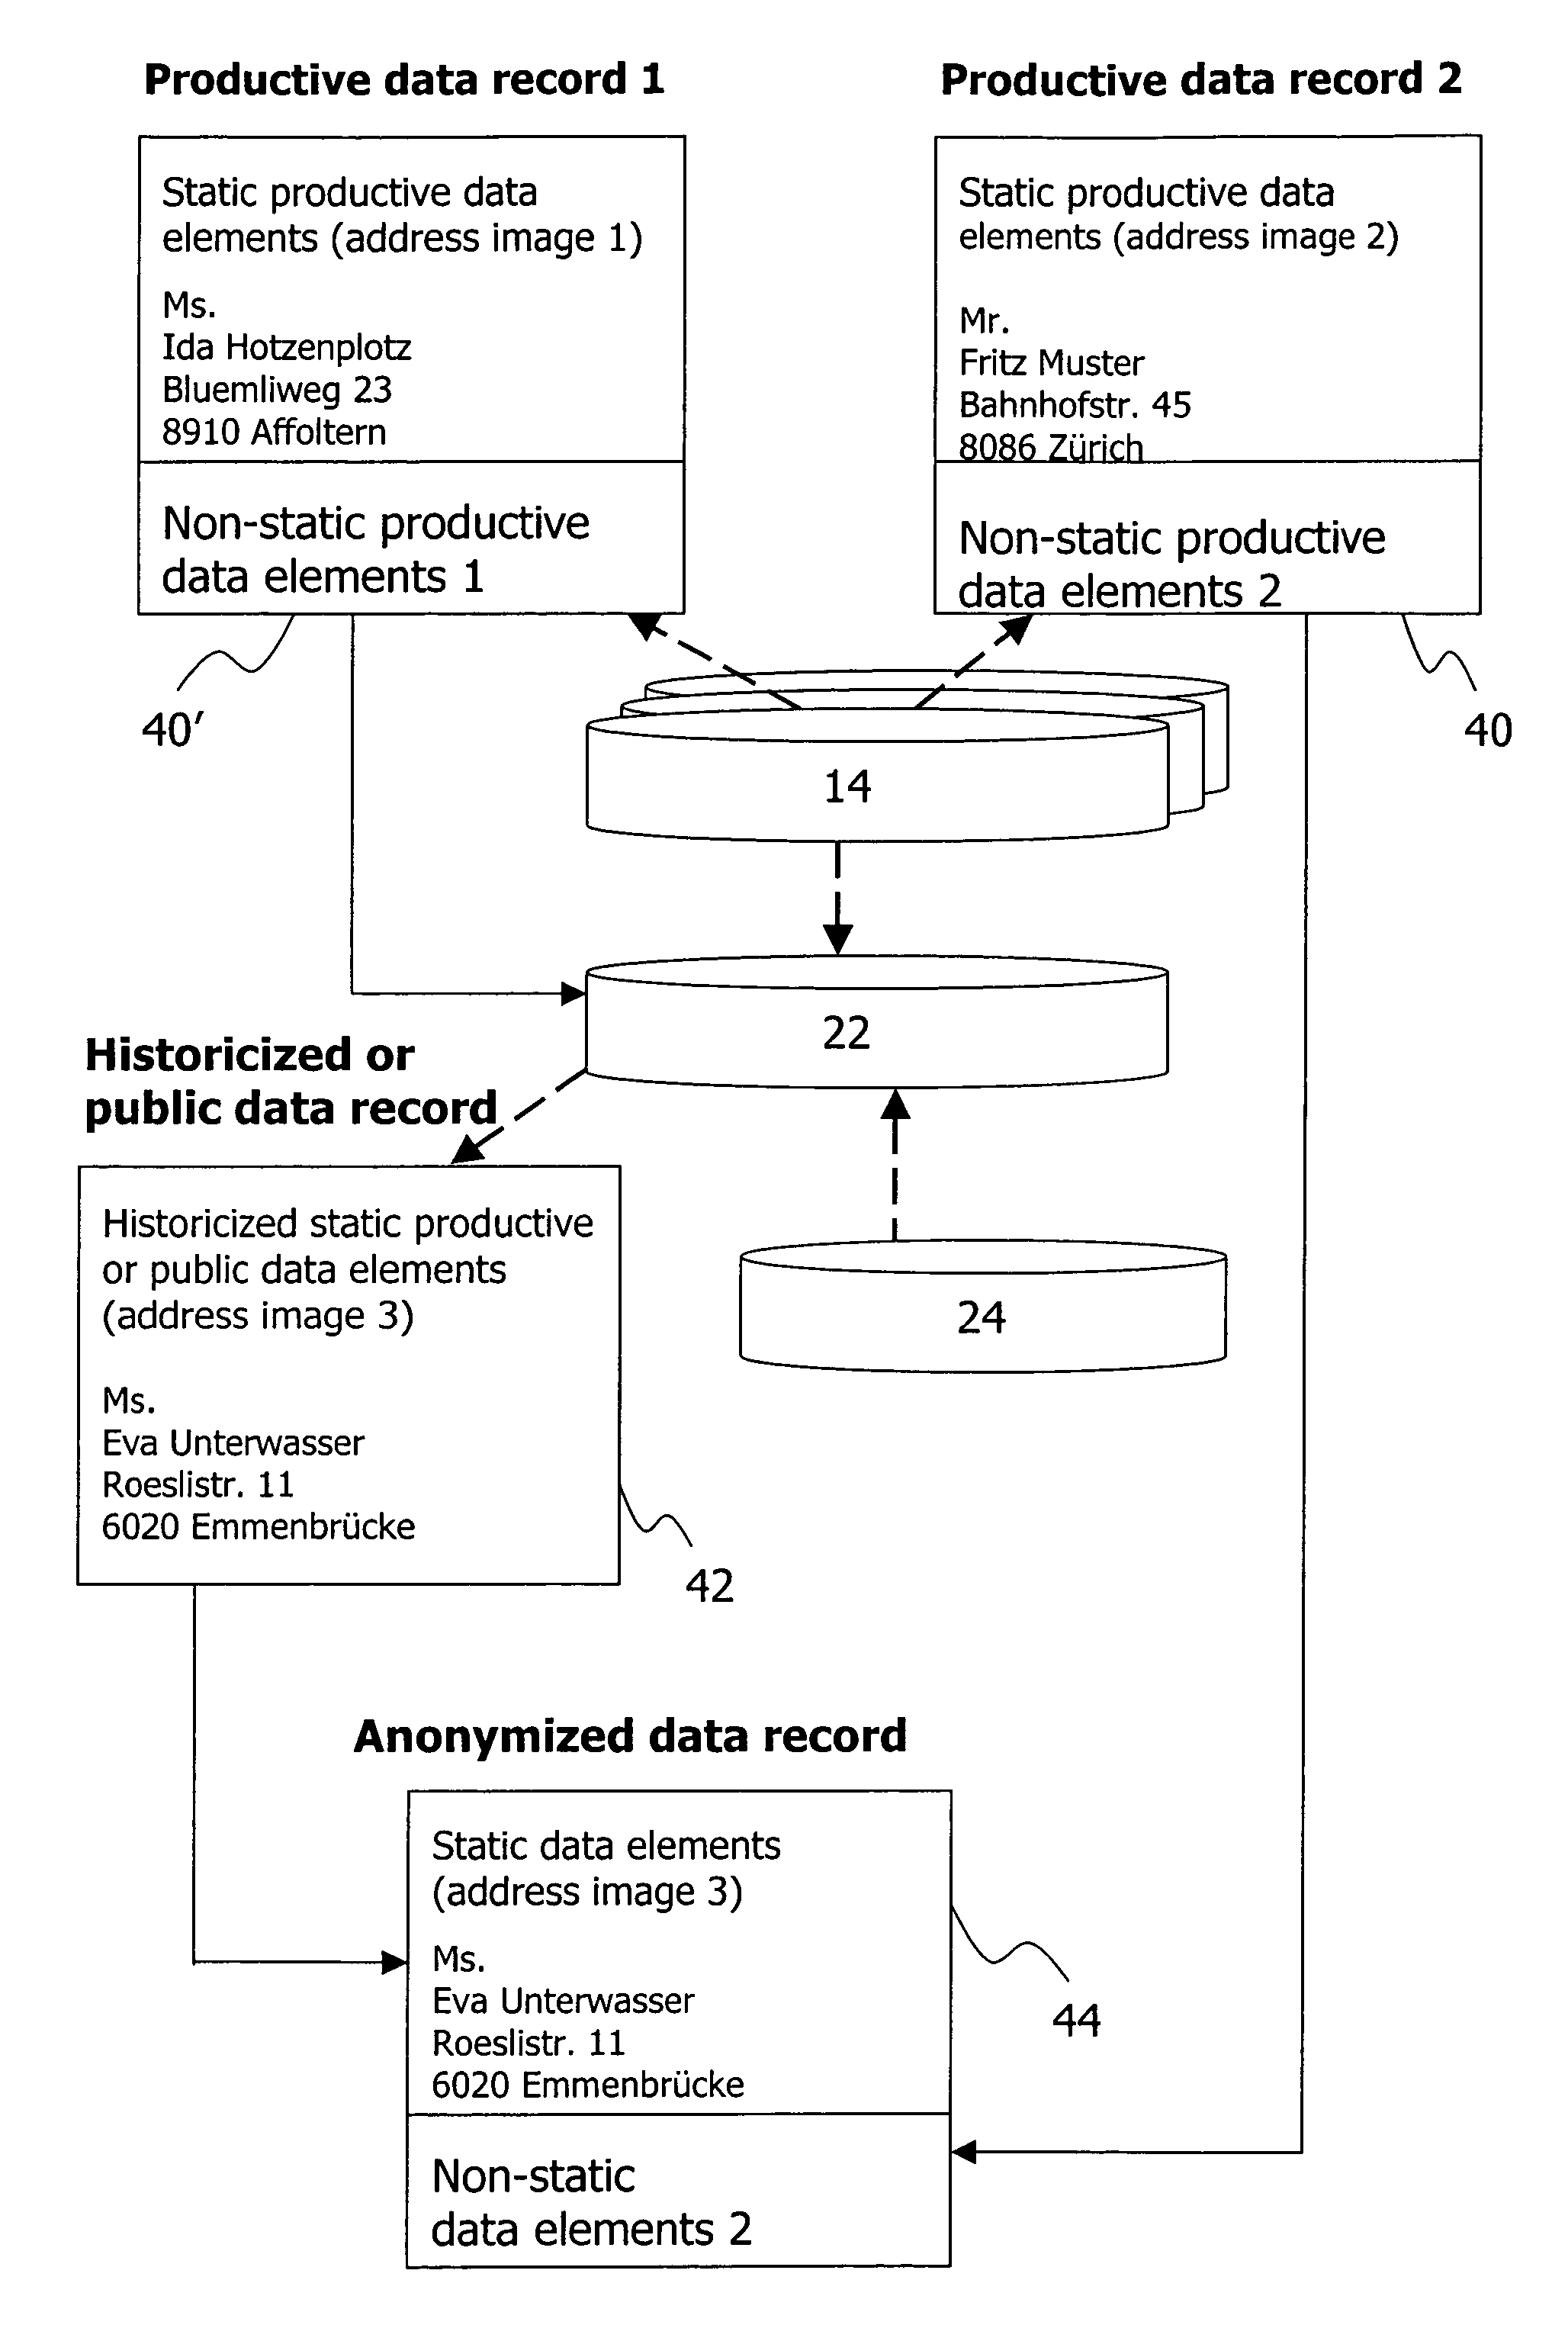 Generation of updatable anonymized data records for testing and developing purposes